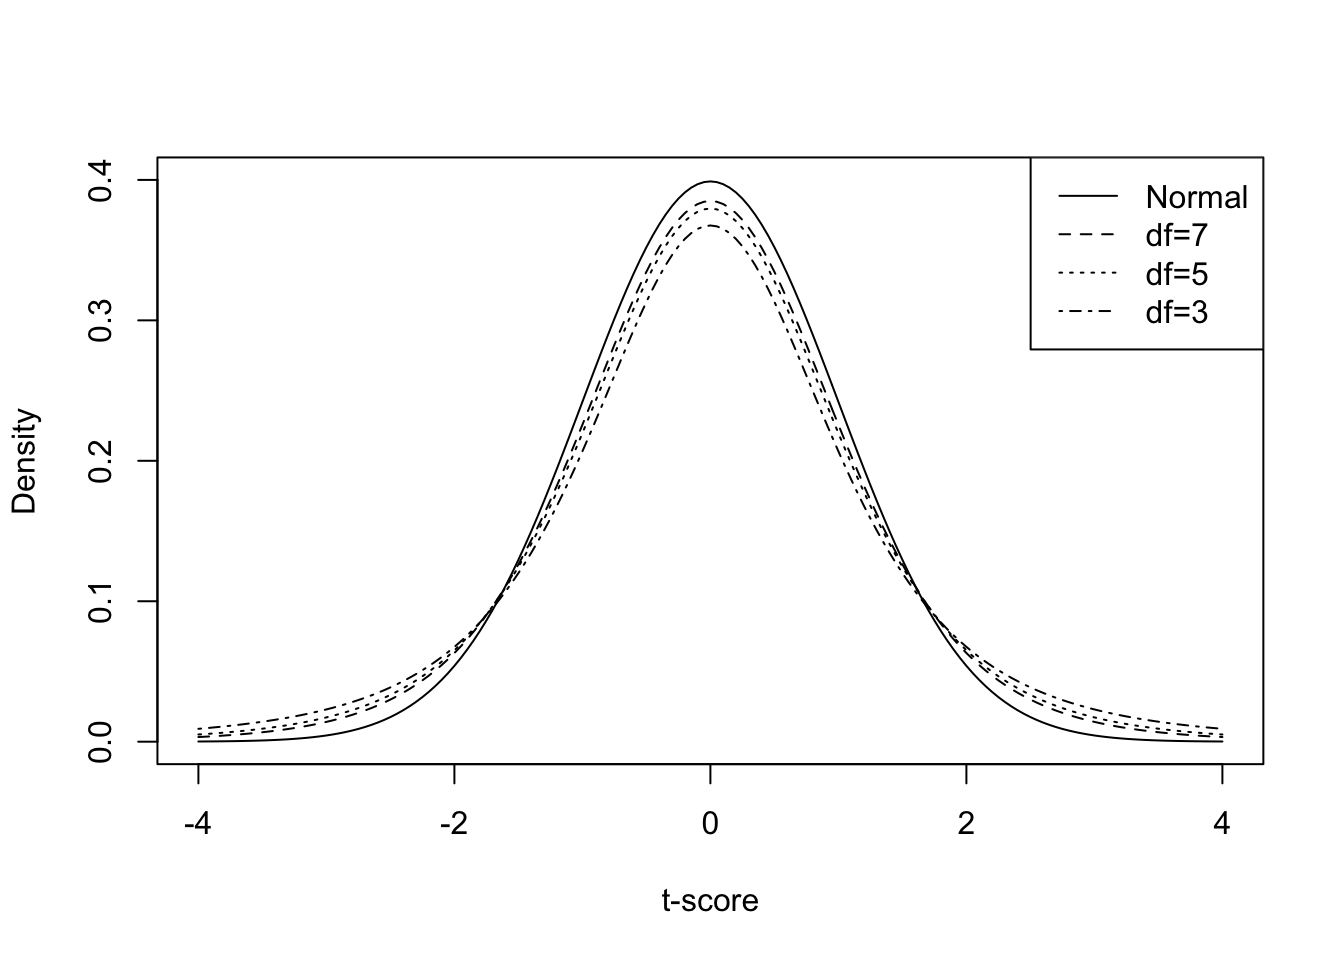 Degrees of Freedom and Resemblance of t-distribution to the Normal Distribution